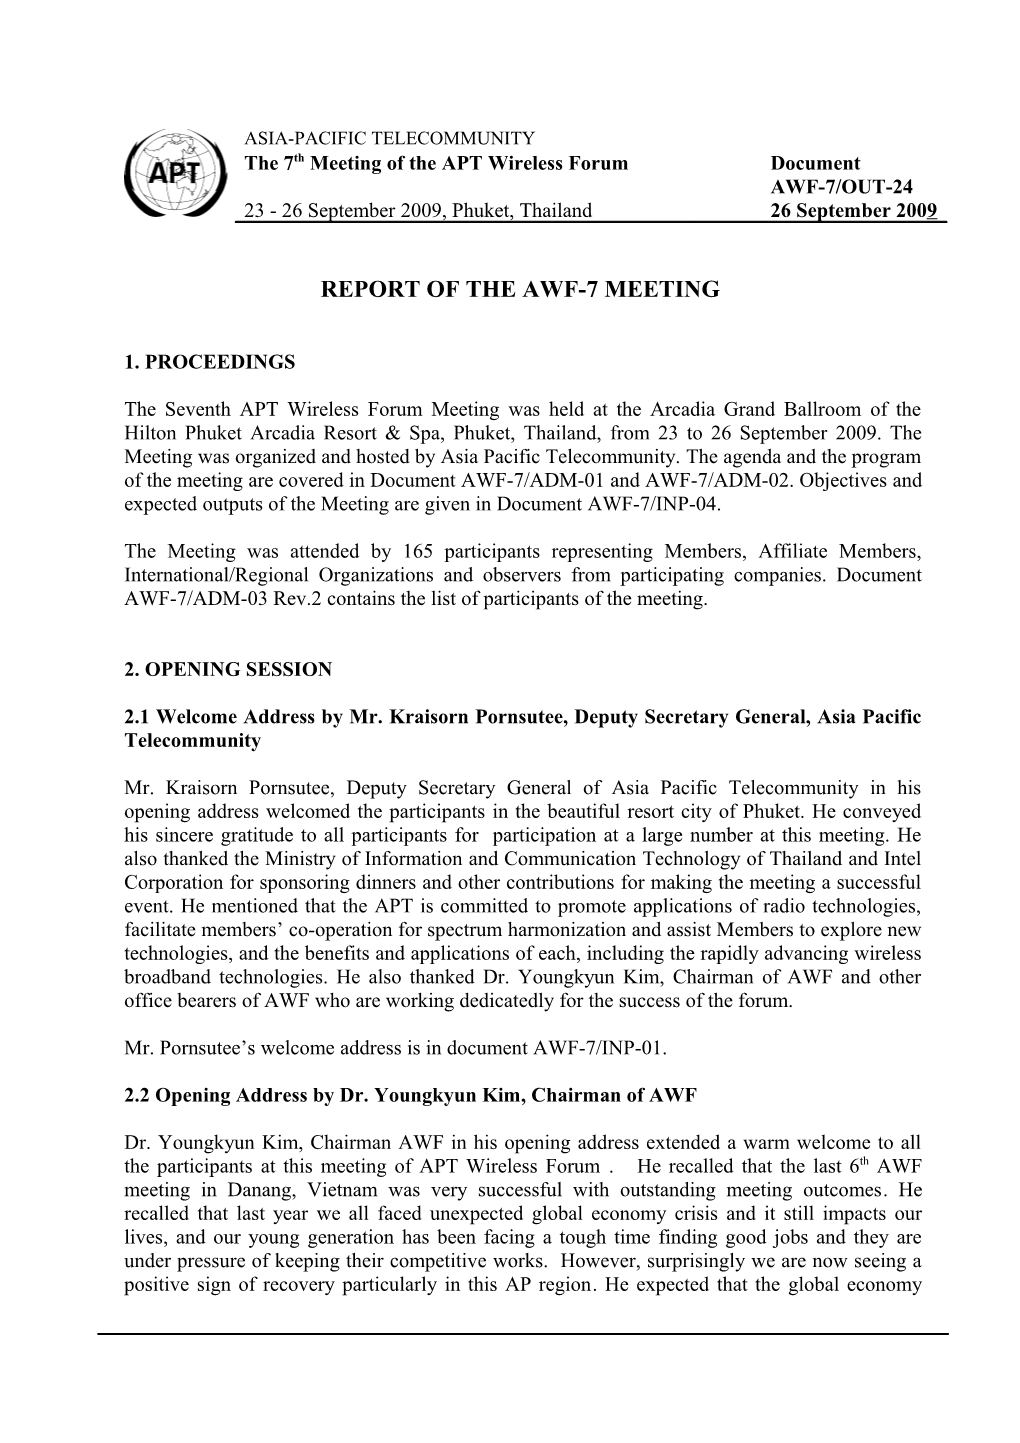 Report of the Awf-7 Meeting